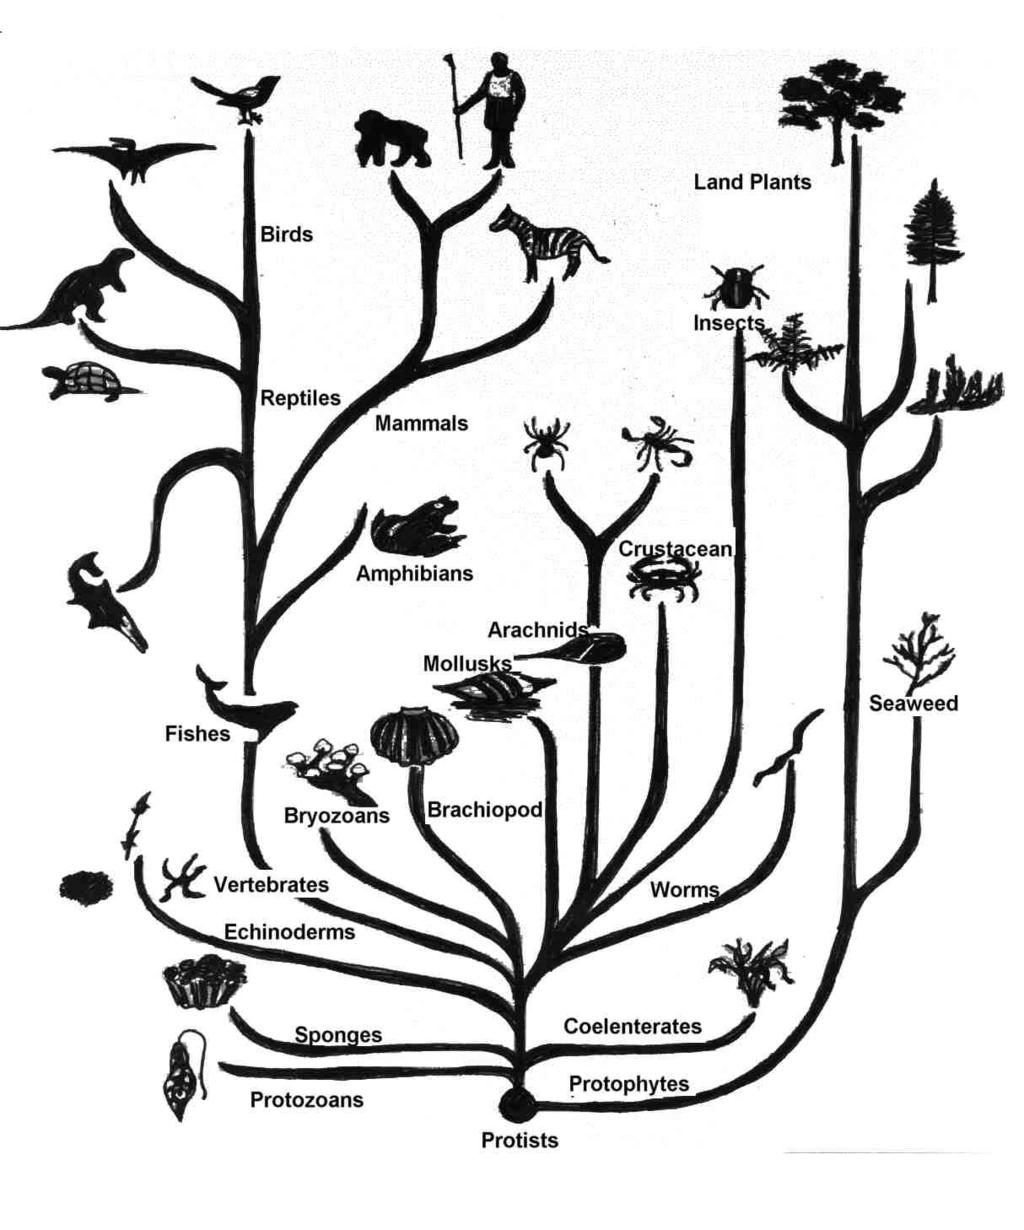 Evolution When organisms are ideally suited to the environment in